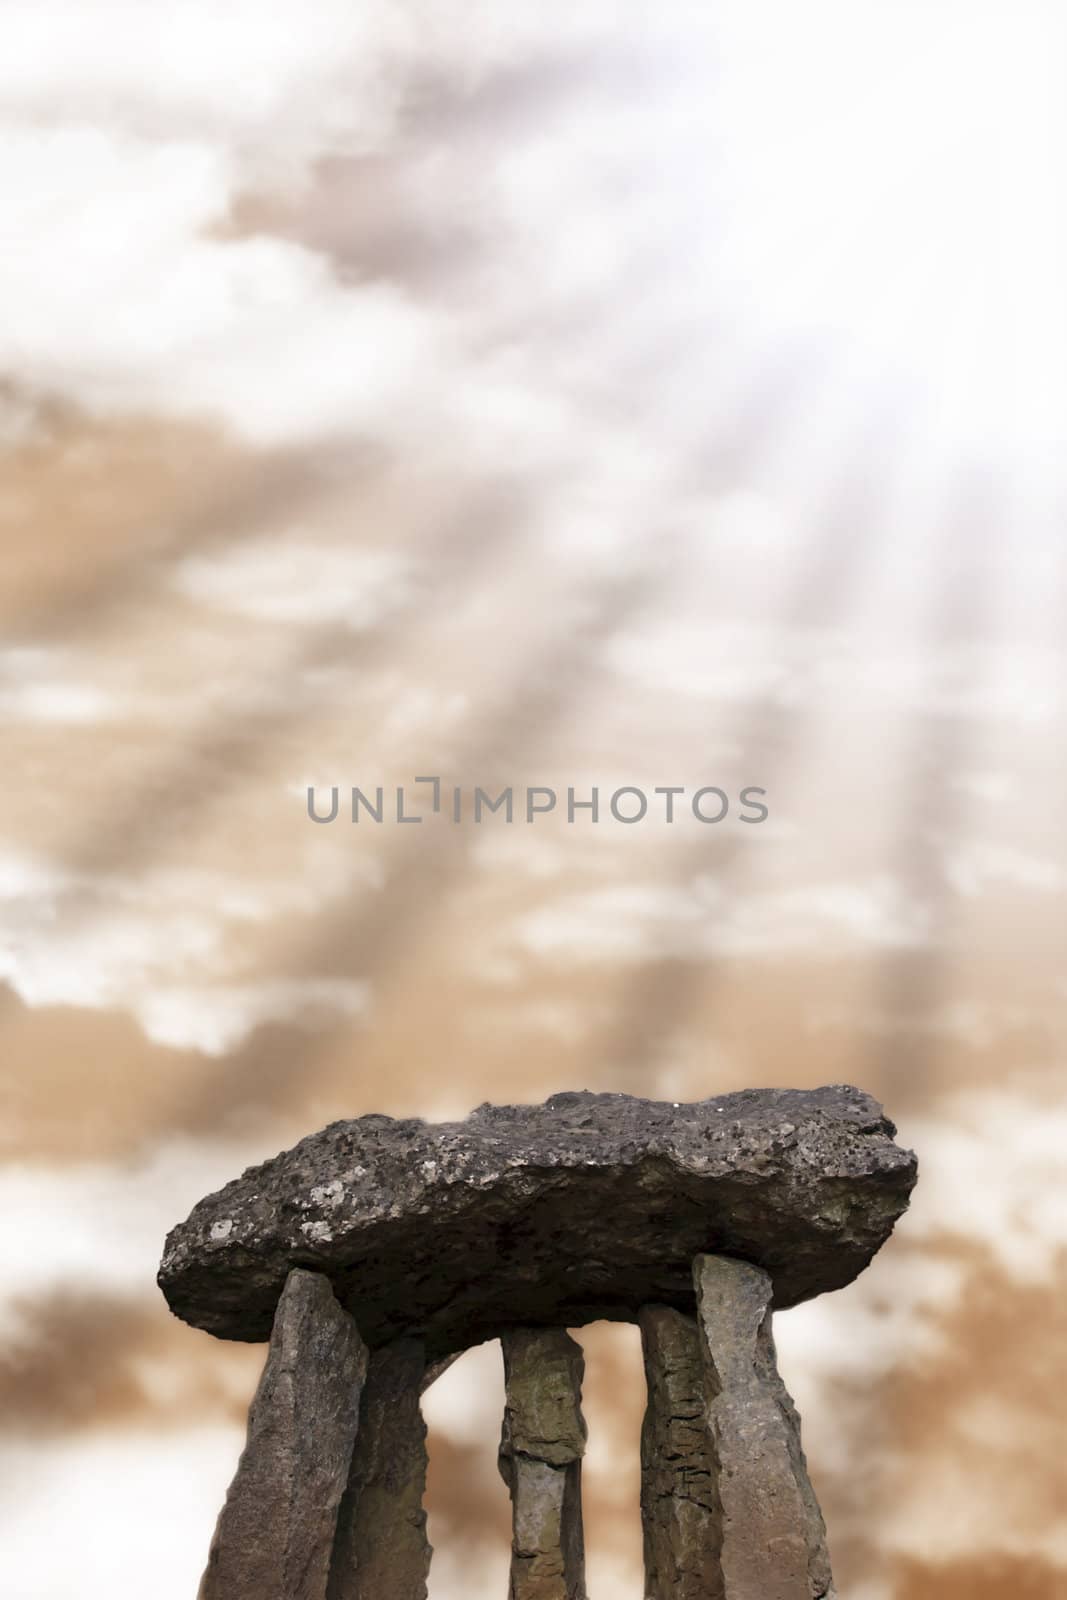 ancient standing stone monuments in county limerick ireland.includes clipping path